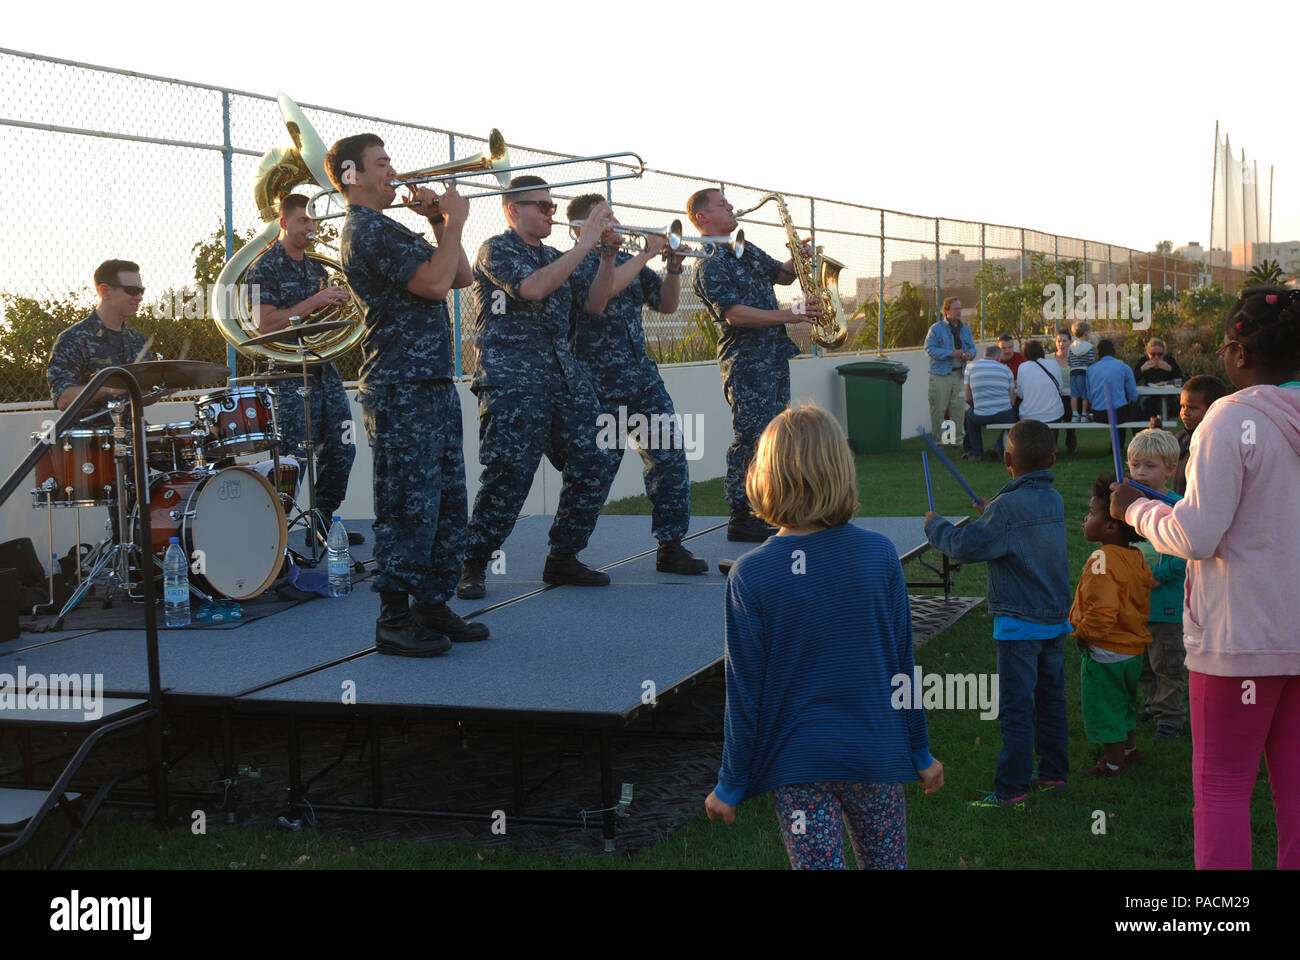 160318-N-ZZ999-093 DAKAR, Senegal (March 18, 2016) The U.S. Naval Forces Europe Brass Band performs at Ebbet’s field in Dakar, Senegal for embassy staff and their families during exercise Obangame/Saharan Express 2016, March 18. Obangame/Saharan Express, one of three African regional express series exercises facilitated by U.S. Naval Forces Europe-Africa/U.S. 6th Fleet, seeks to increase regional cooperation, maritime domain awareness, information sharing practices and improve interoperability among participating forces in order to enhance maritime security and regional economic stability. (U. Stock Photo